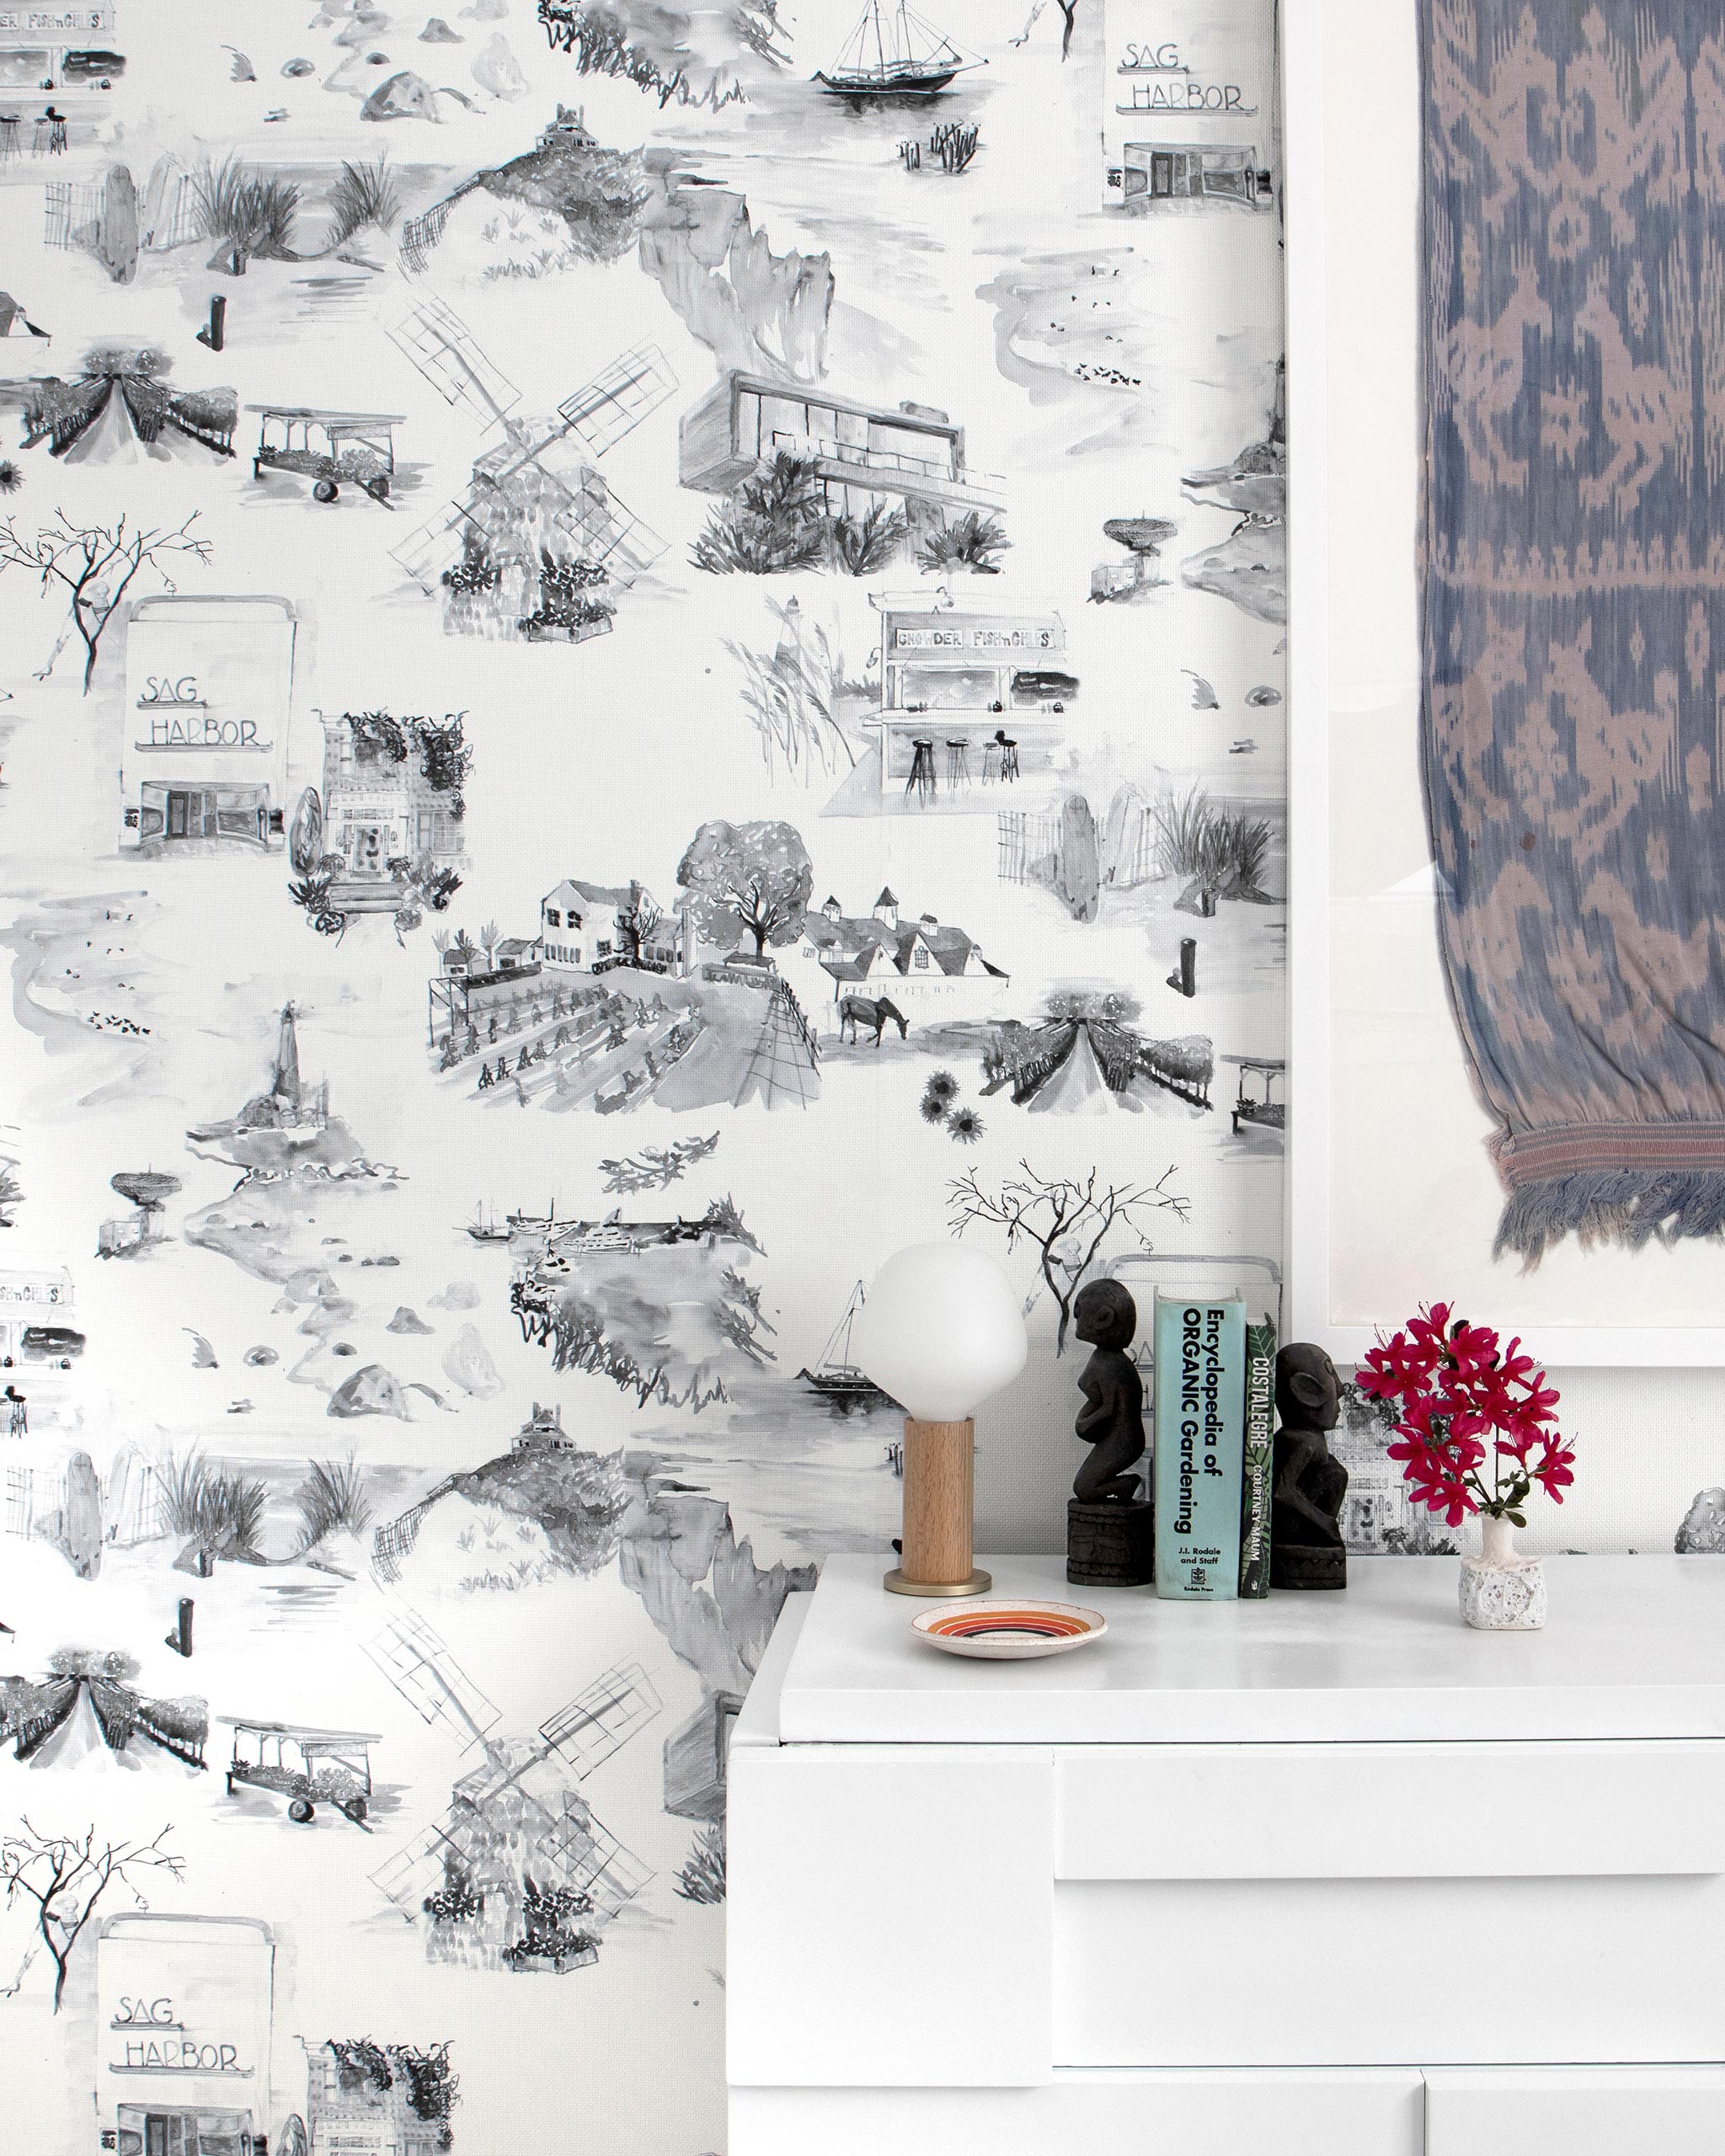 A cluttered sideboard stands in front of a wall papered in a playful illustrated city print in gray, black and white.